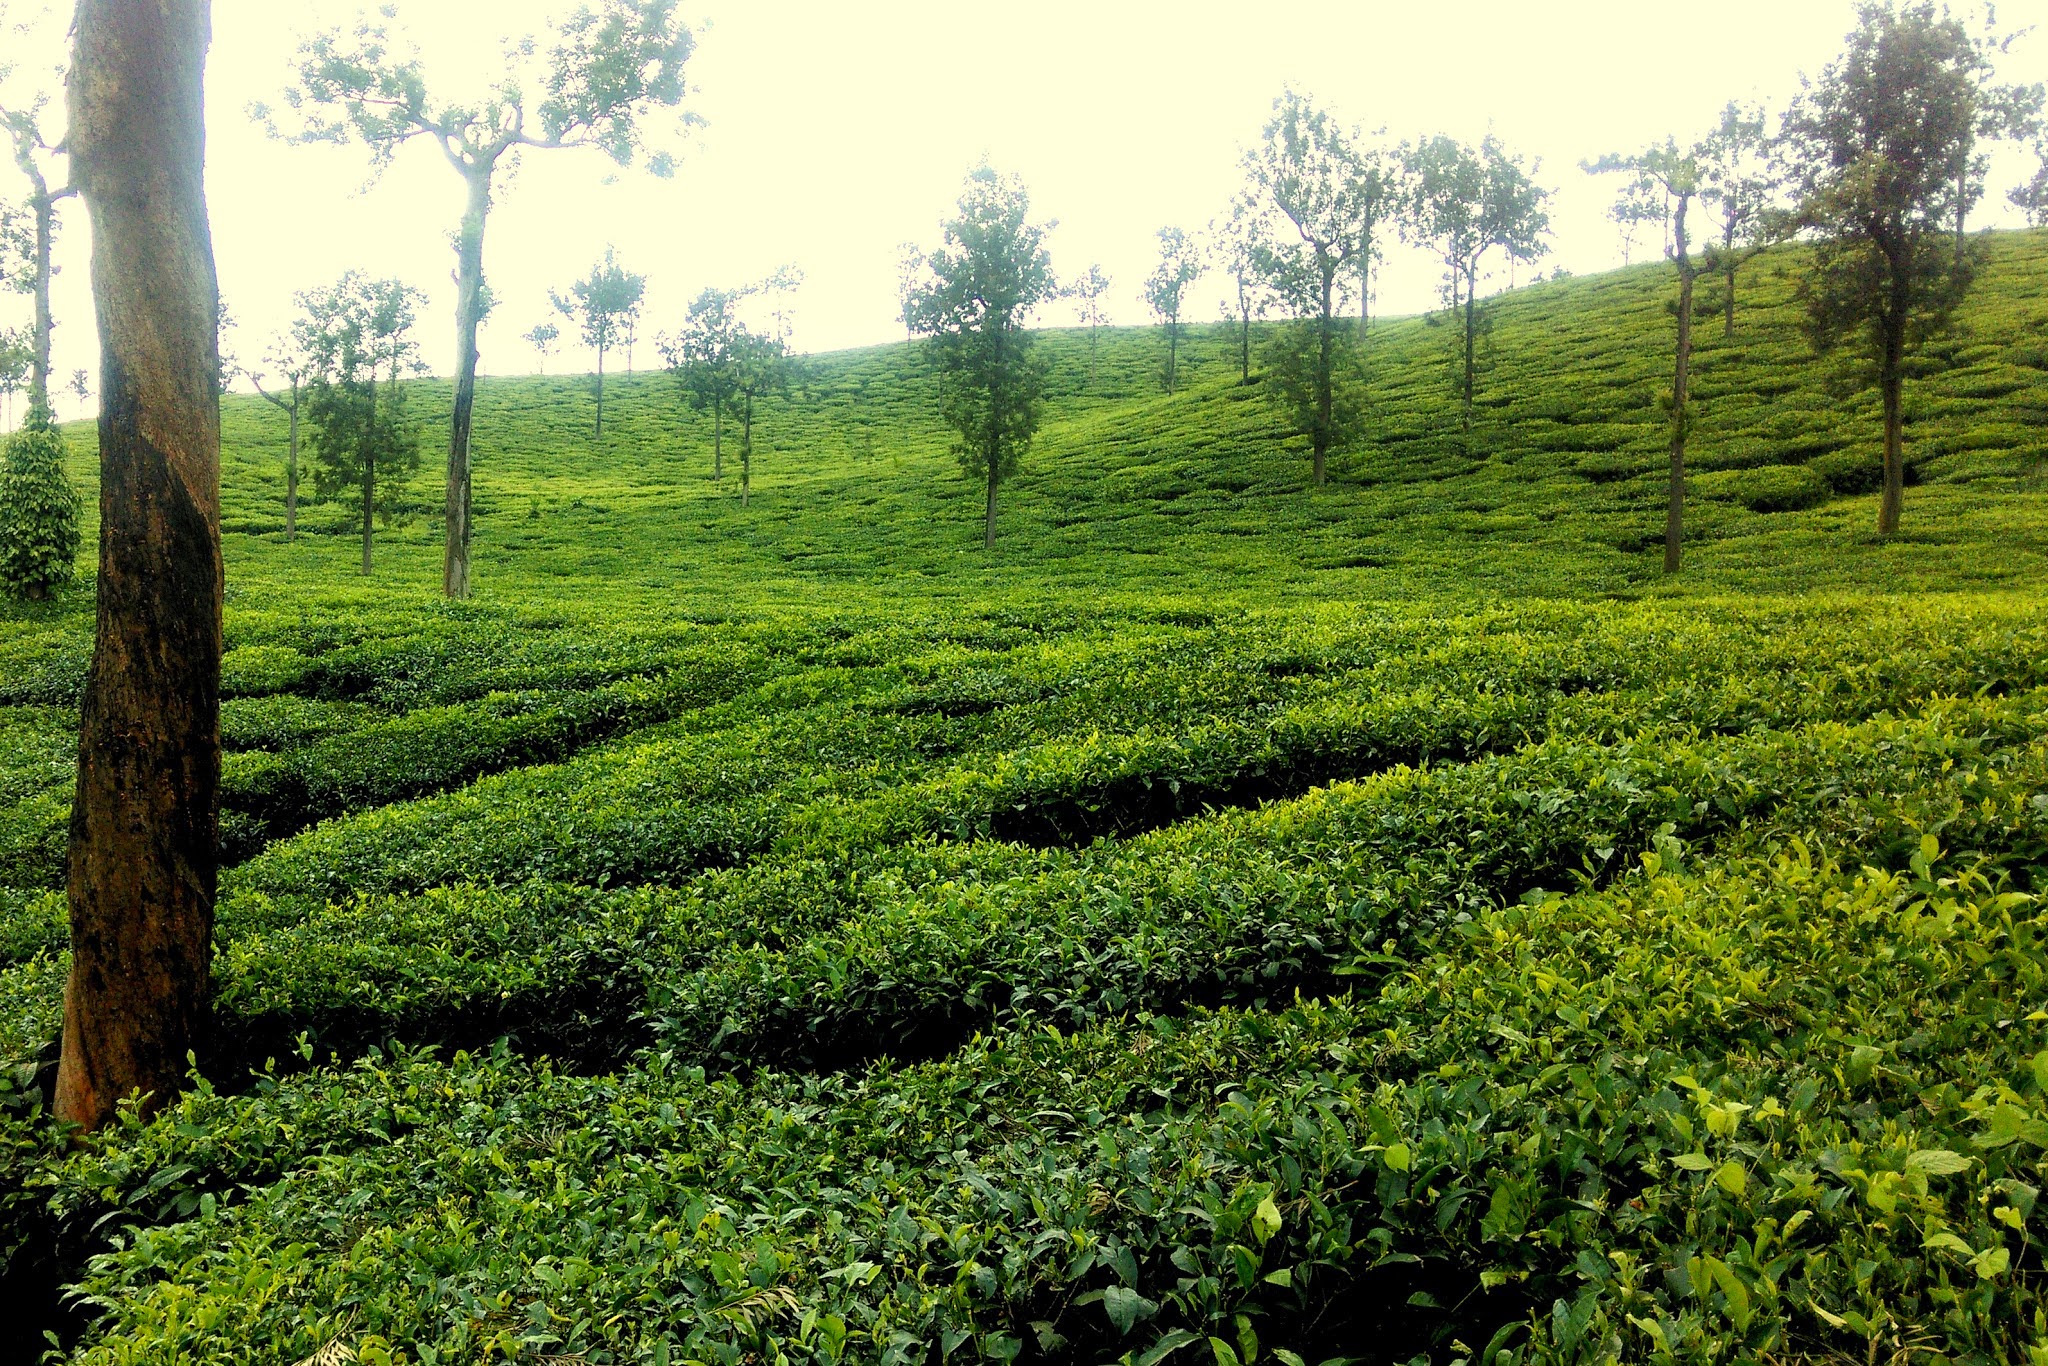 29 Wayanad Tour Packages - Get Deals on Holiday Packages | HolidayIQ